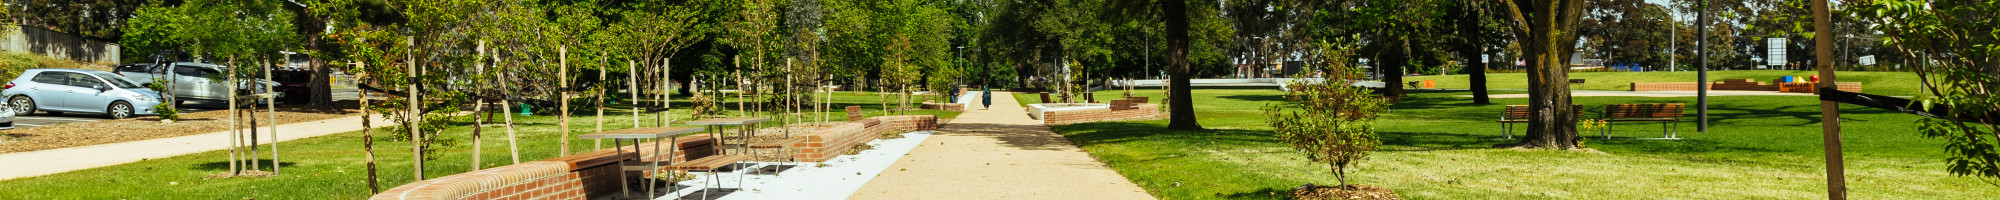 pathway in a park